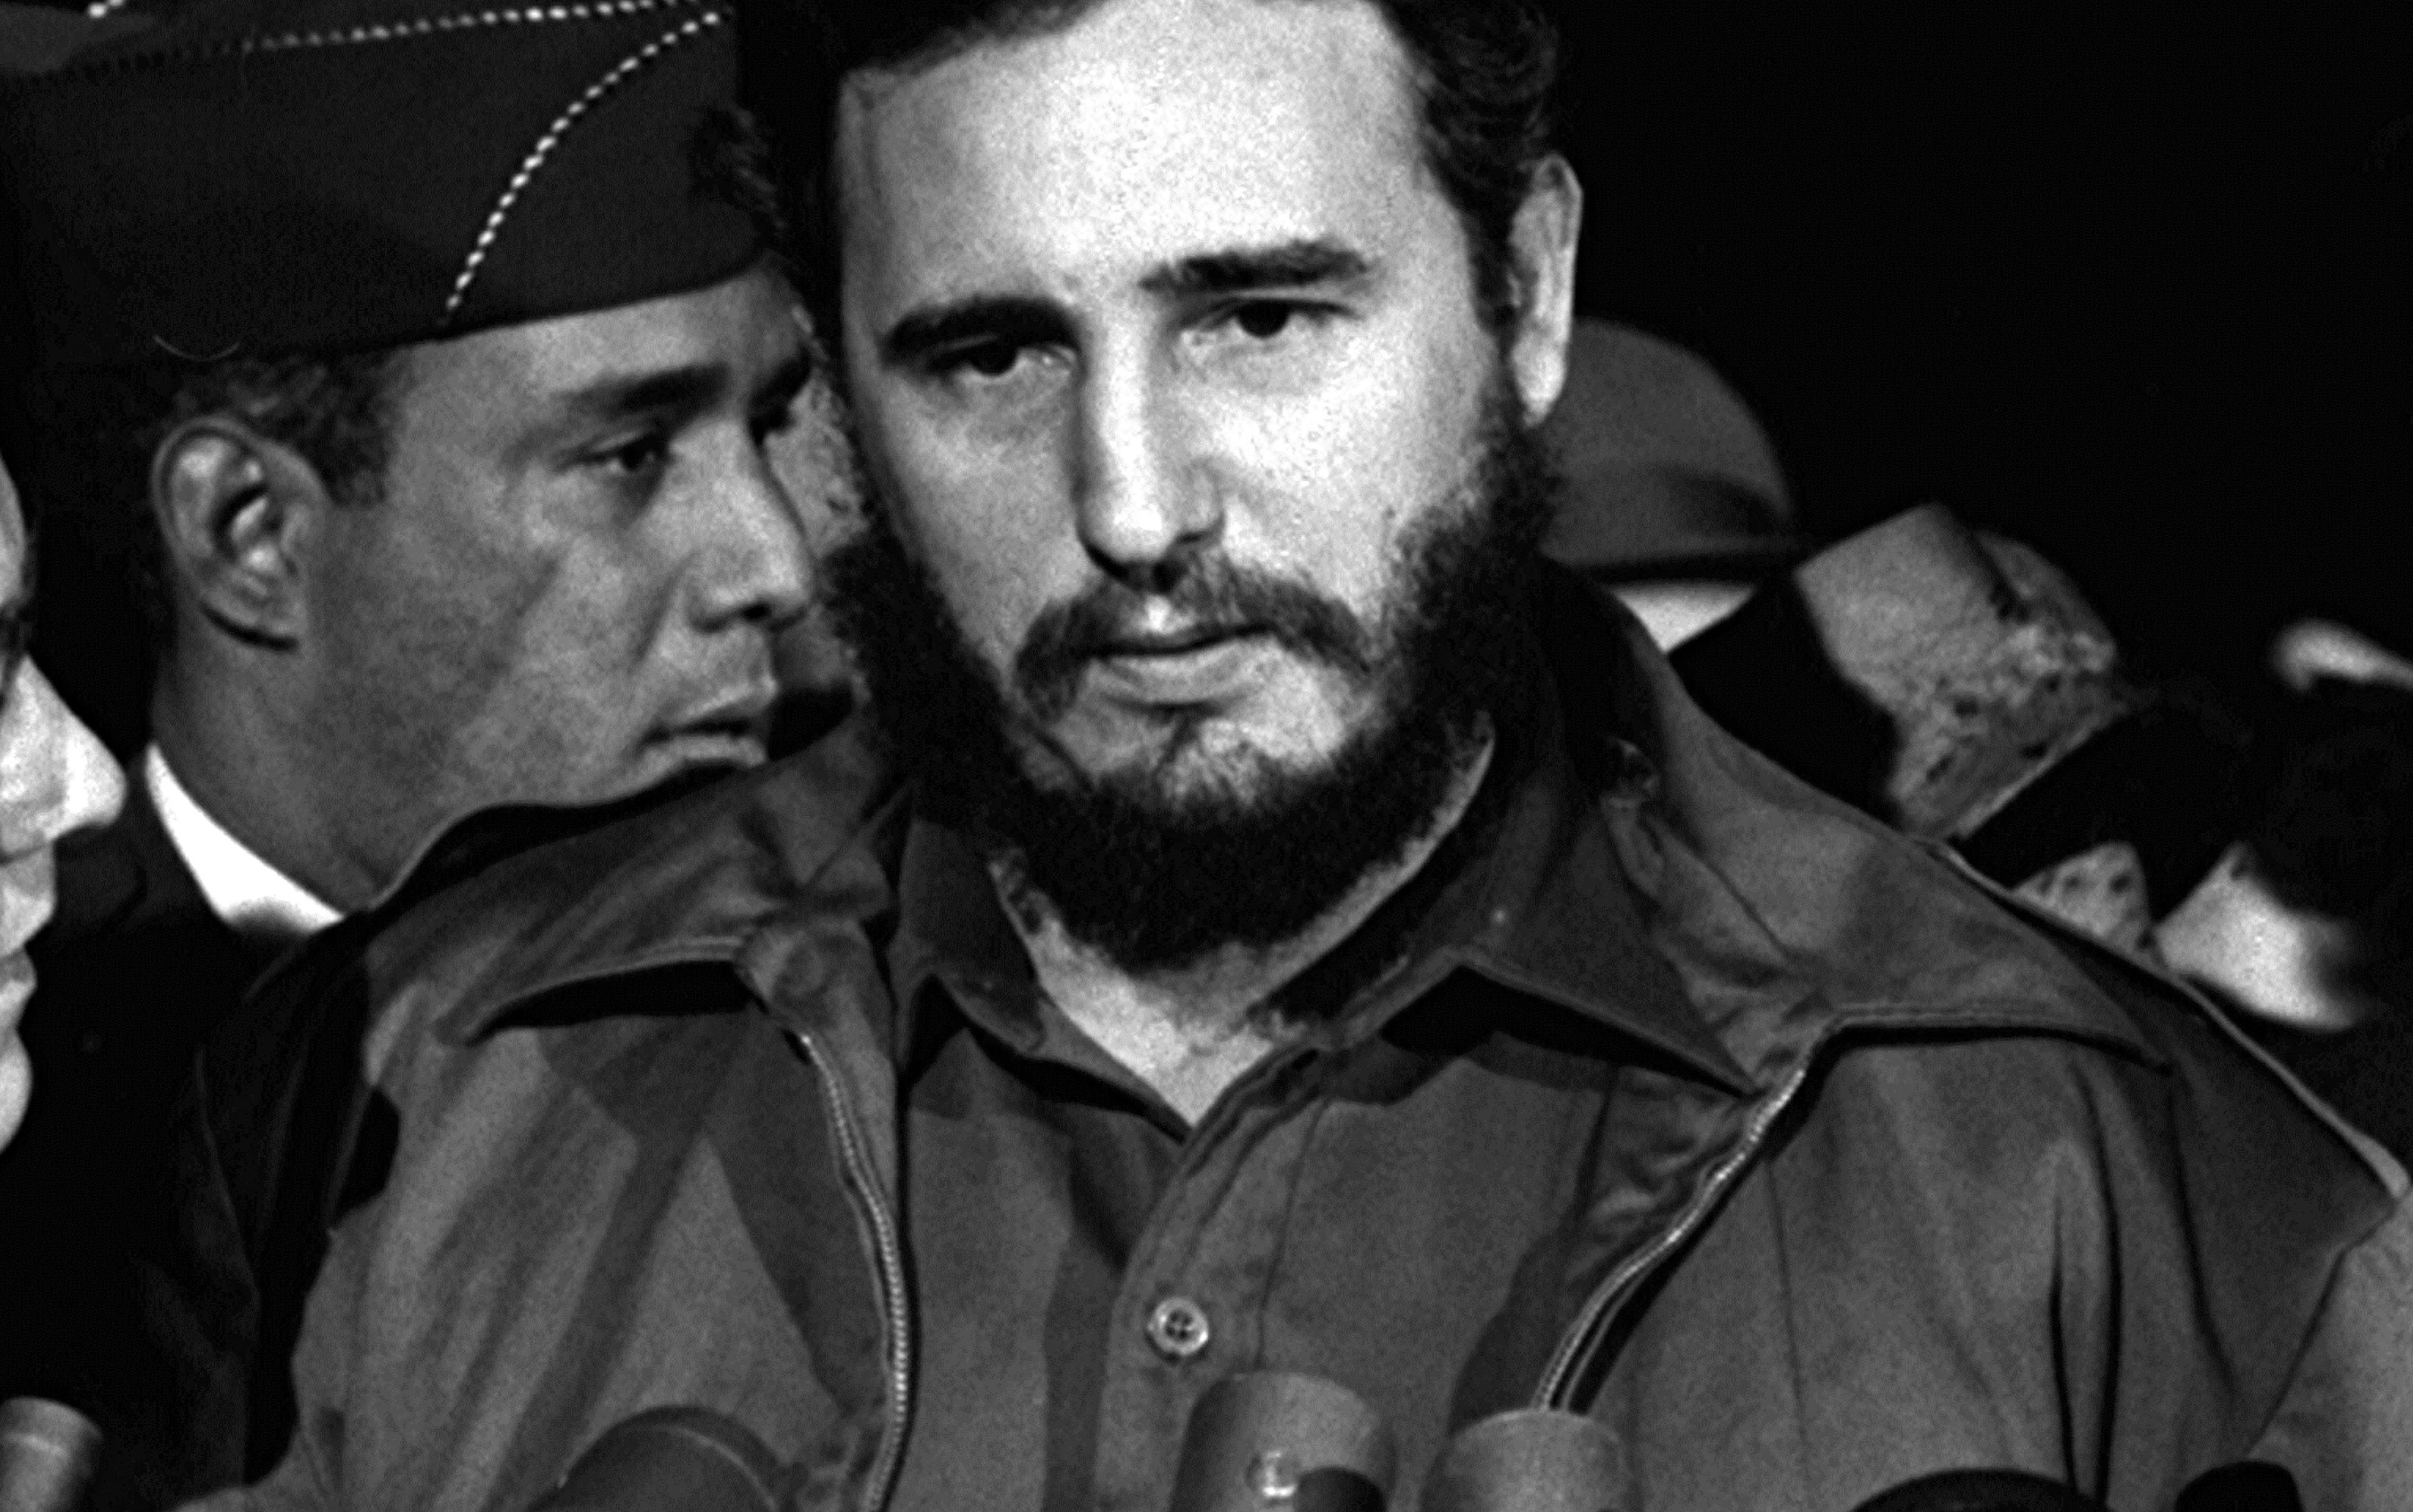 The Resilient Life of Fidel Castro